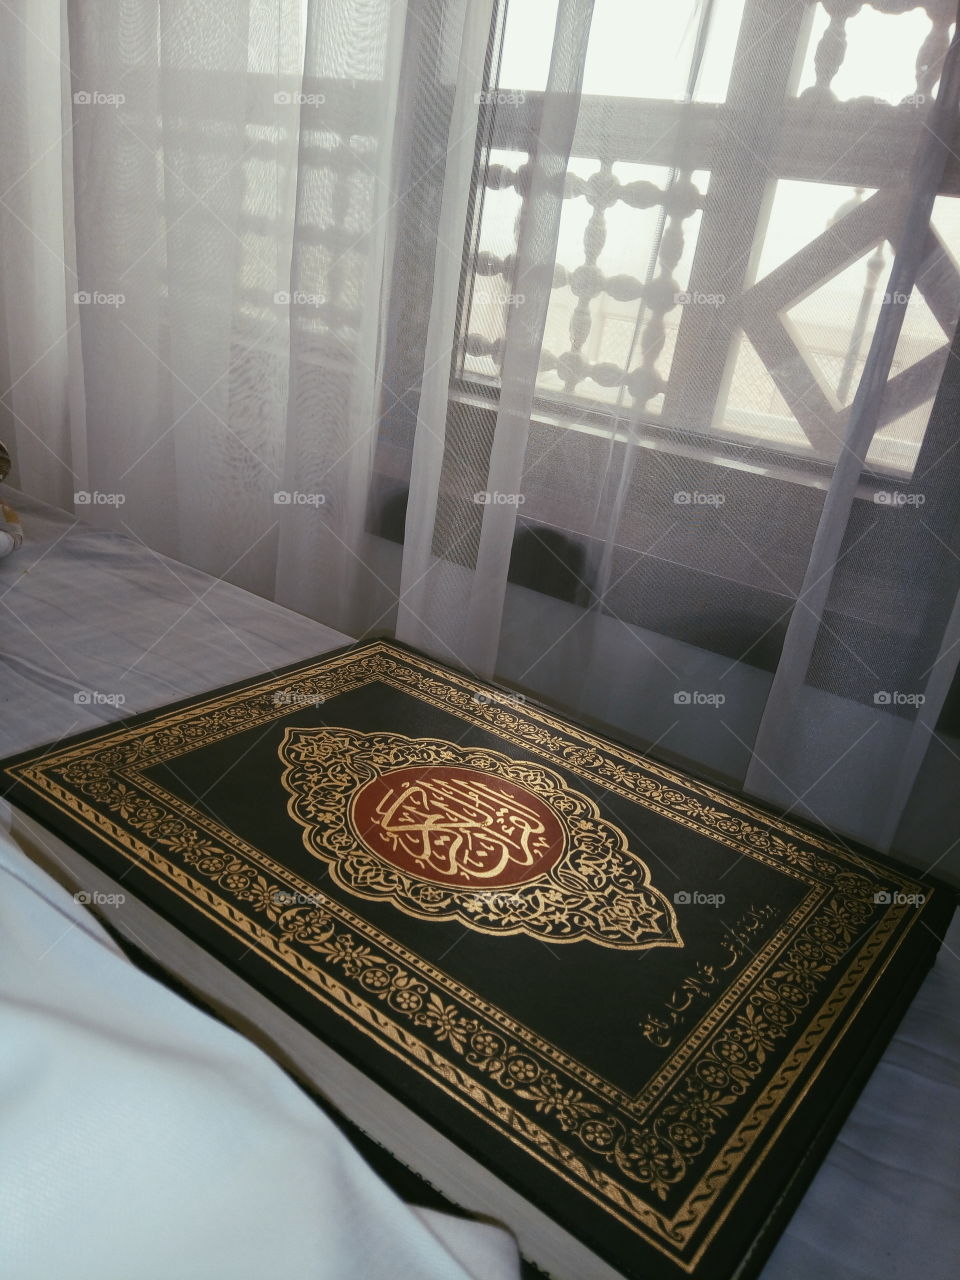 this photo shows a book of the Koran which is a sacred book for muslims. The photo was taken at the madinah of Saudi Arabia